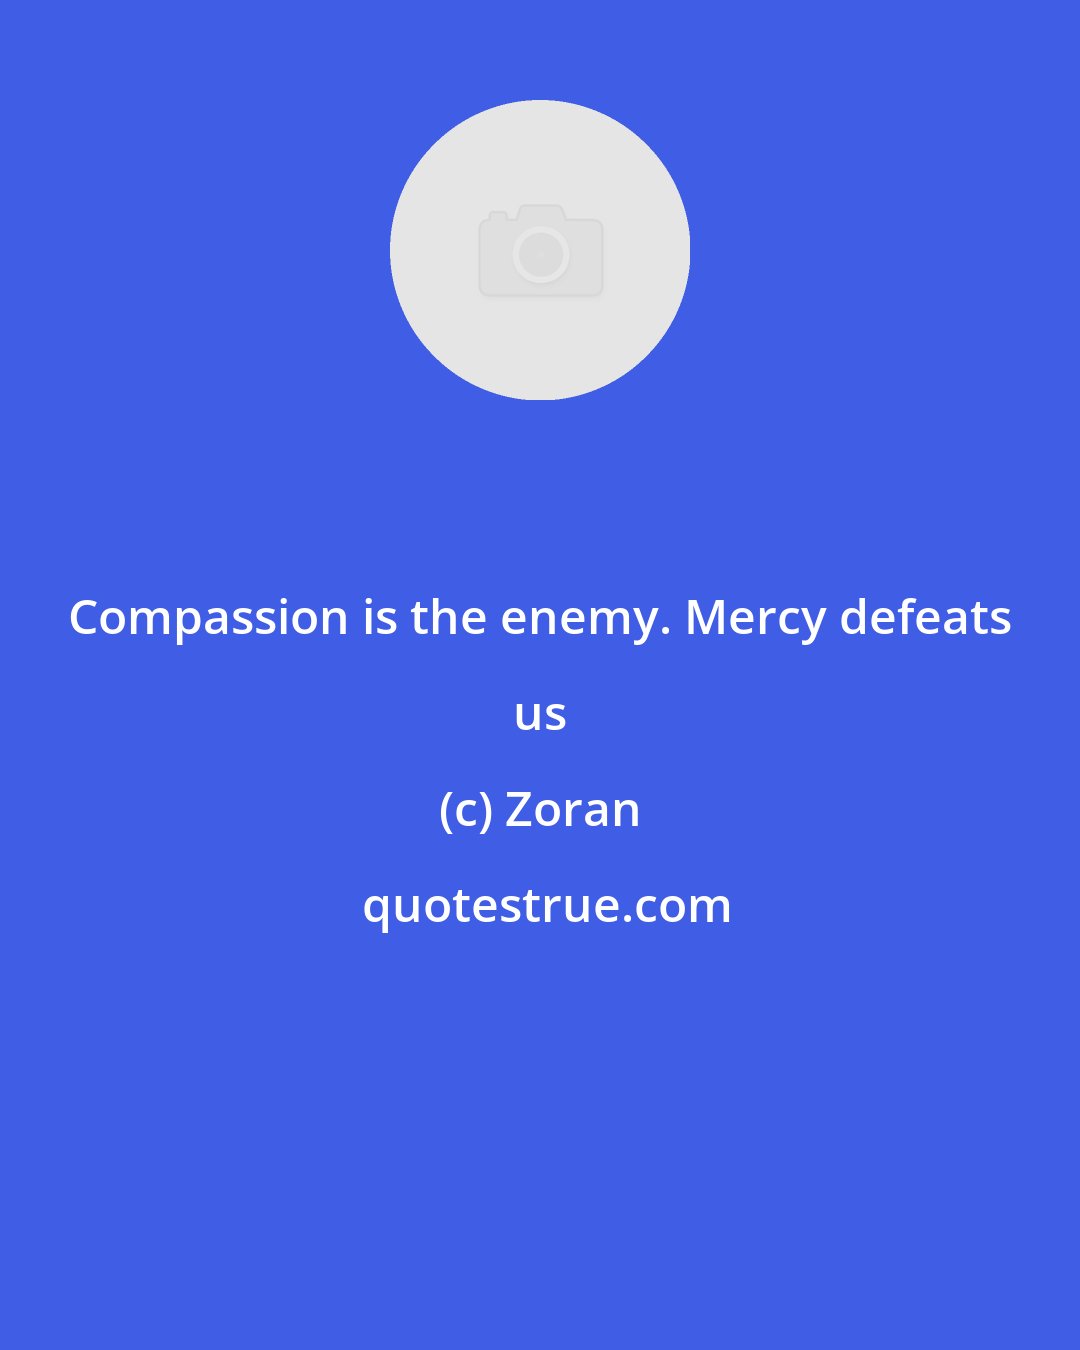 Zoran: Compassion is the enemy. Mercy defeats us